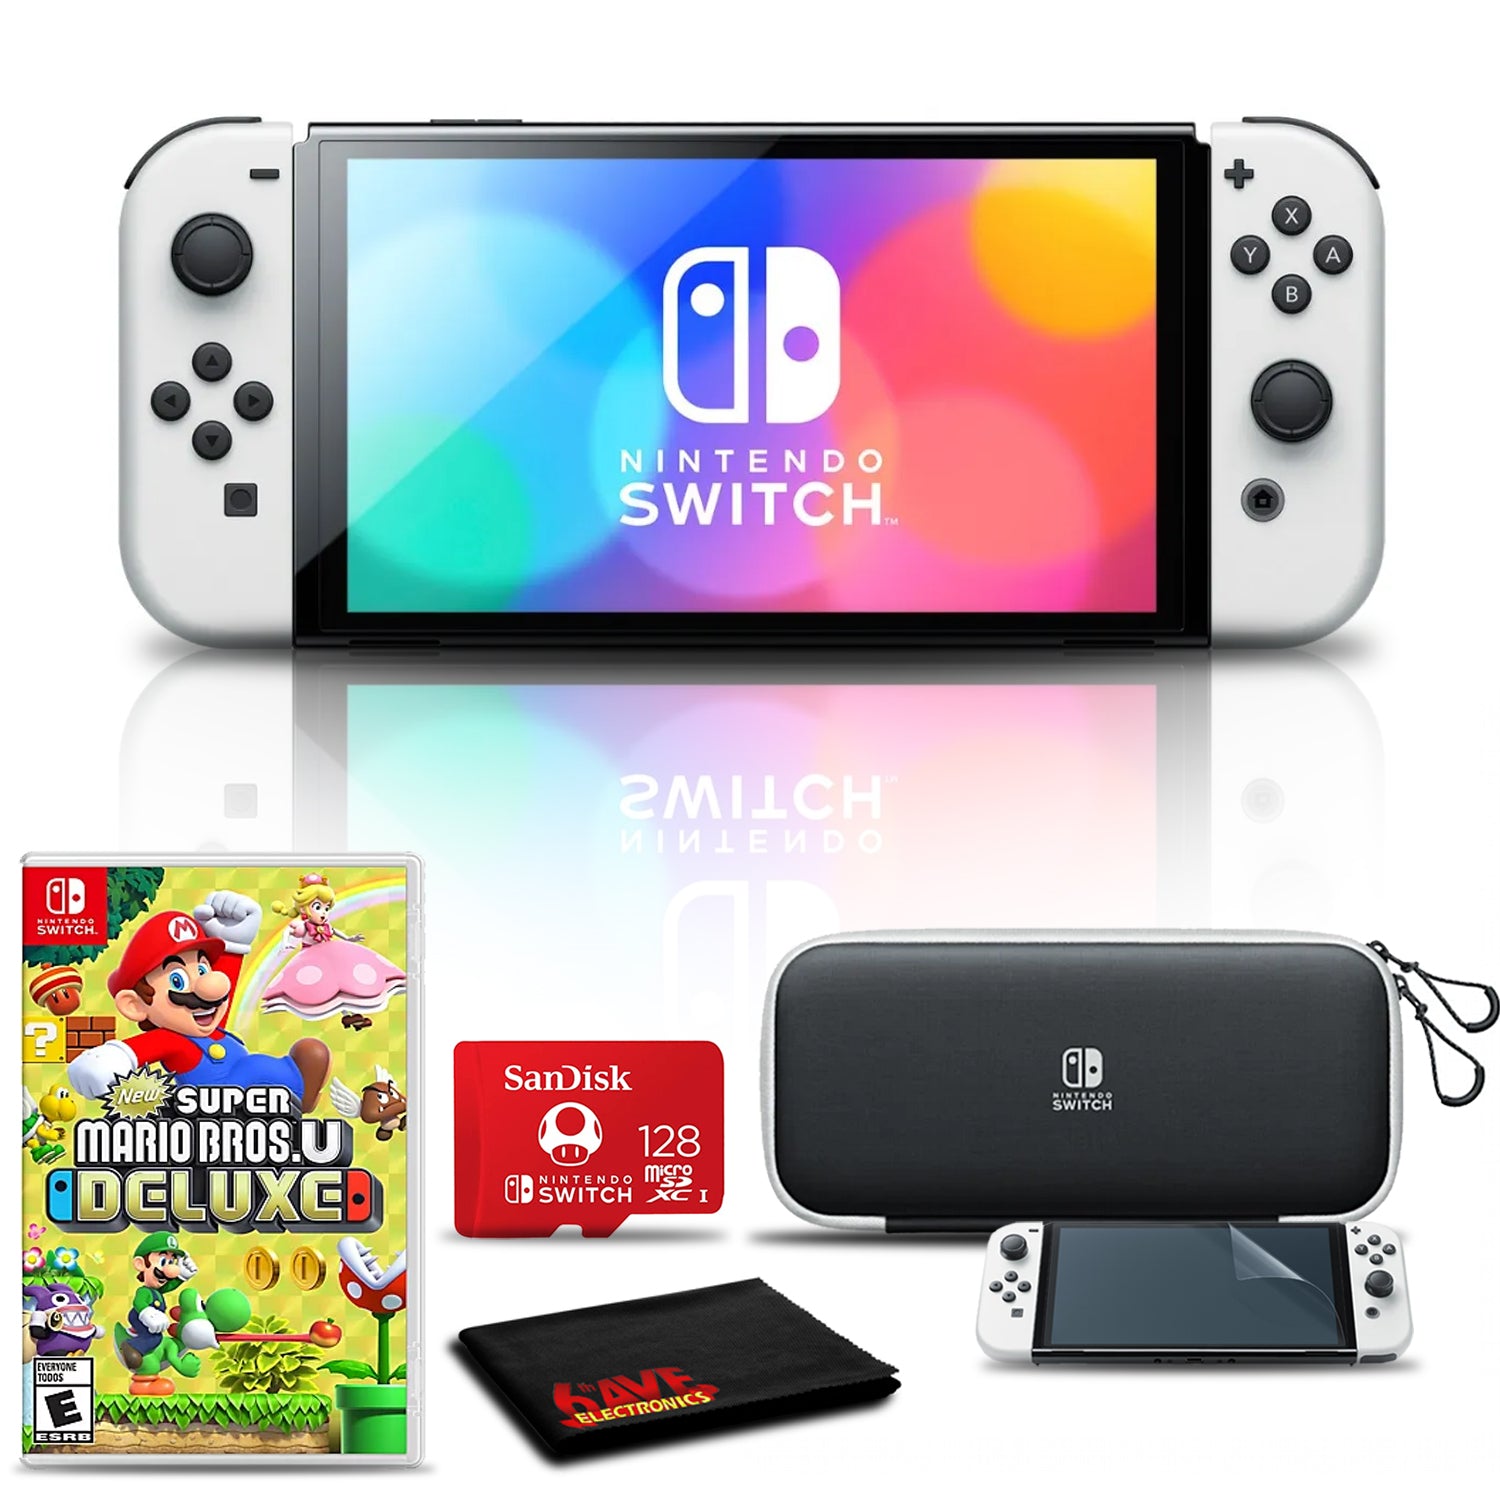 Nintendo Switch OLED White with Super Mario Bros U Deluxe, 128GB Card Bundle